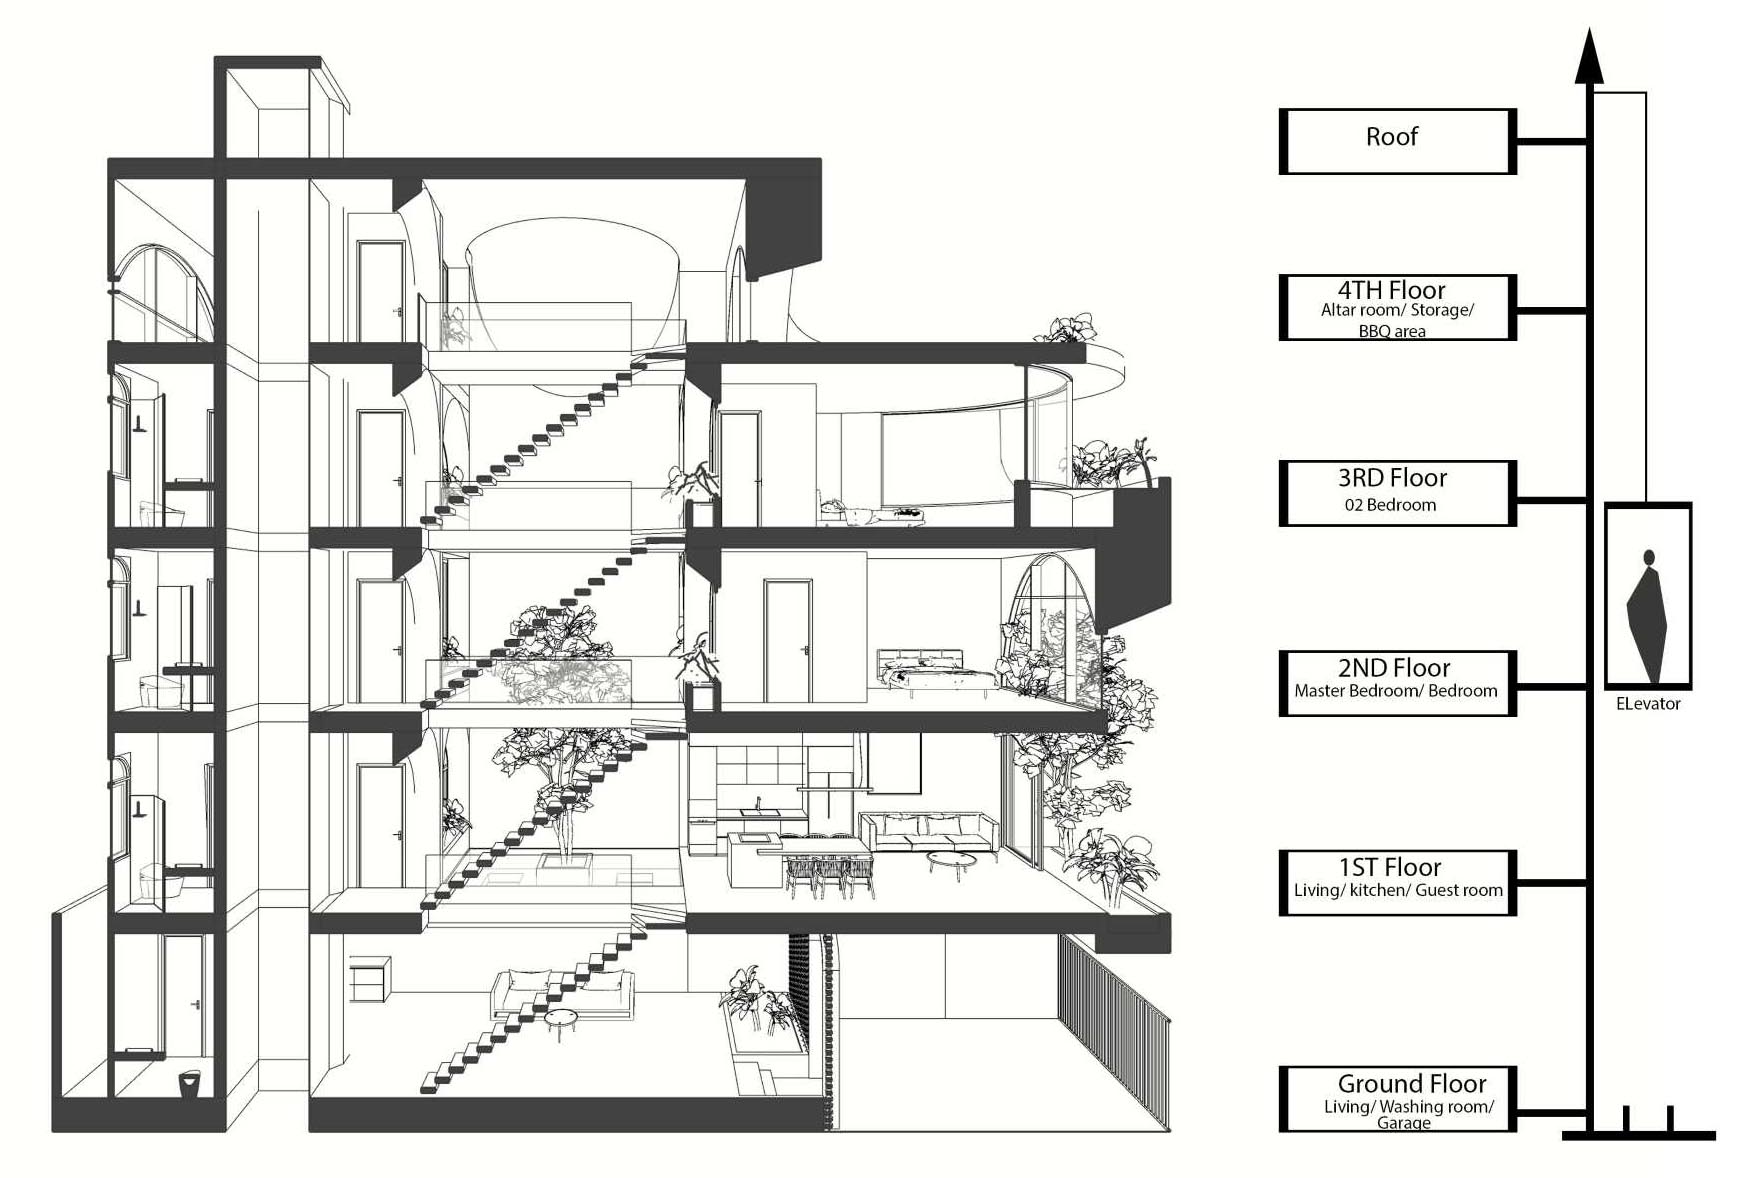 The perspective sections of a multi-storey house.